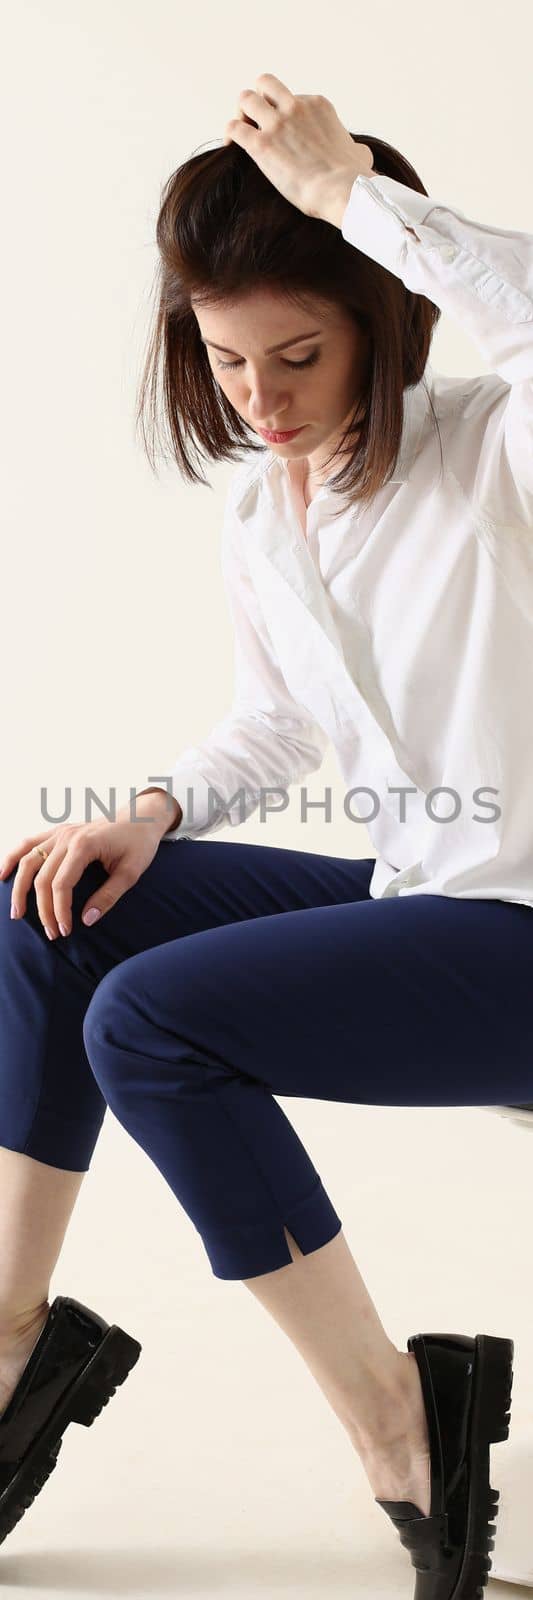 Woman in bad mood, bored and sad, sits on chair and puts hands on head. Woman in depression concept